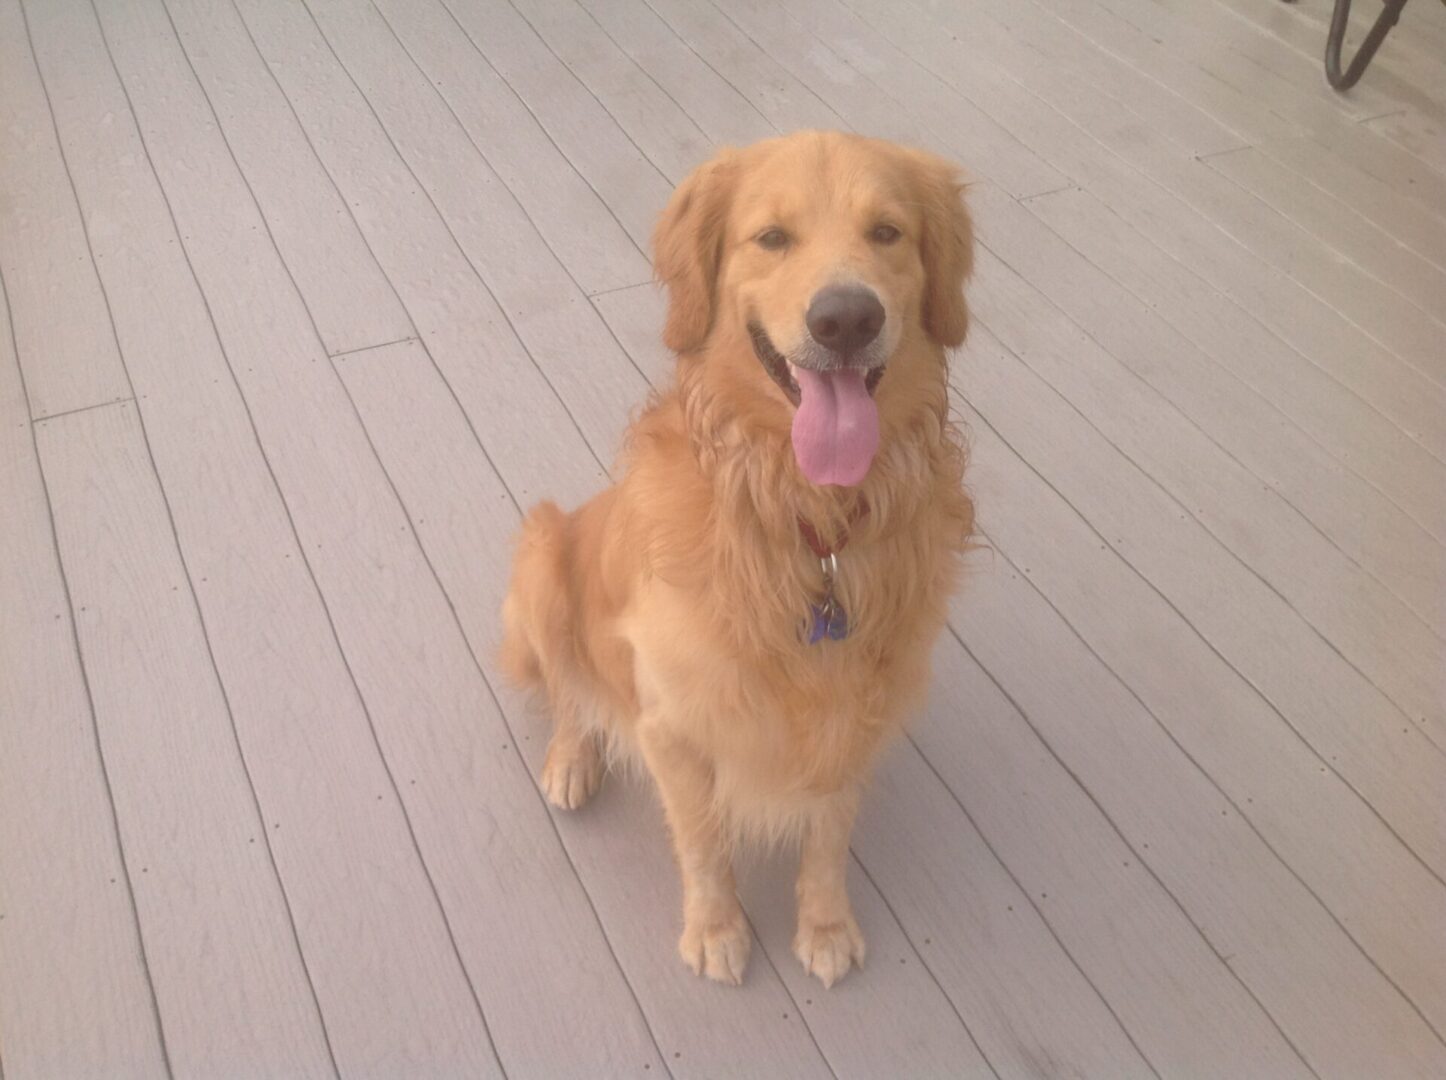 A golden retriever sitting on a wooden deck with its tongue out.